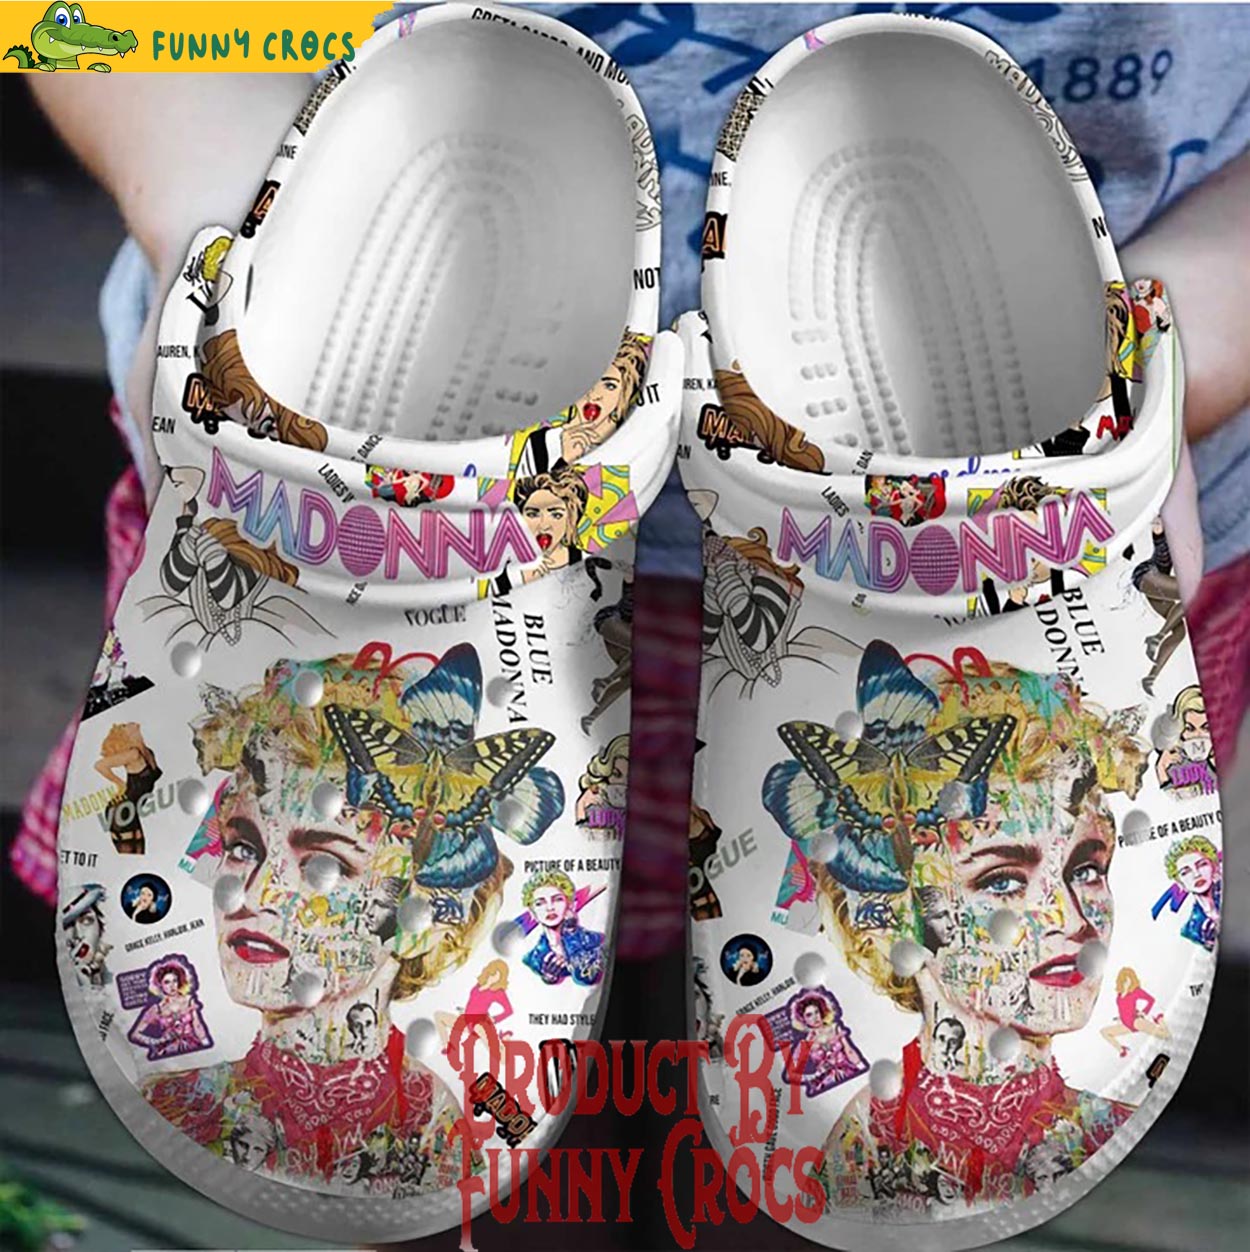 Madonna Crocs Shoes - Discover Comfort And Style Clog Shoes With Funny ...